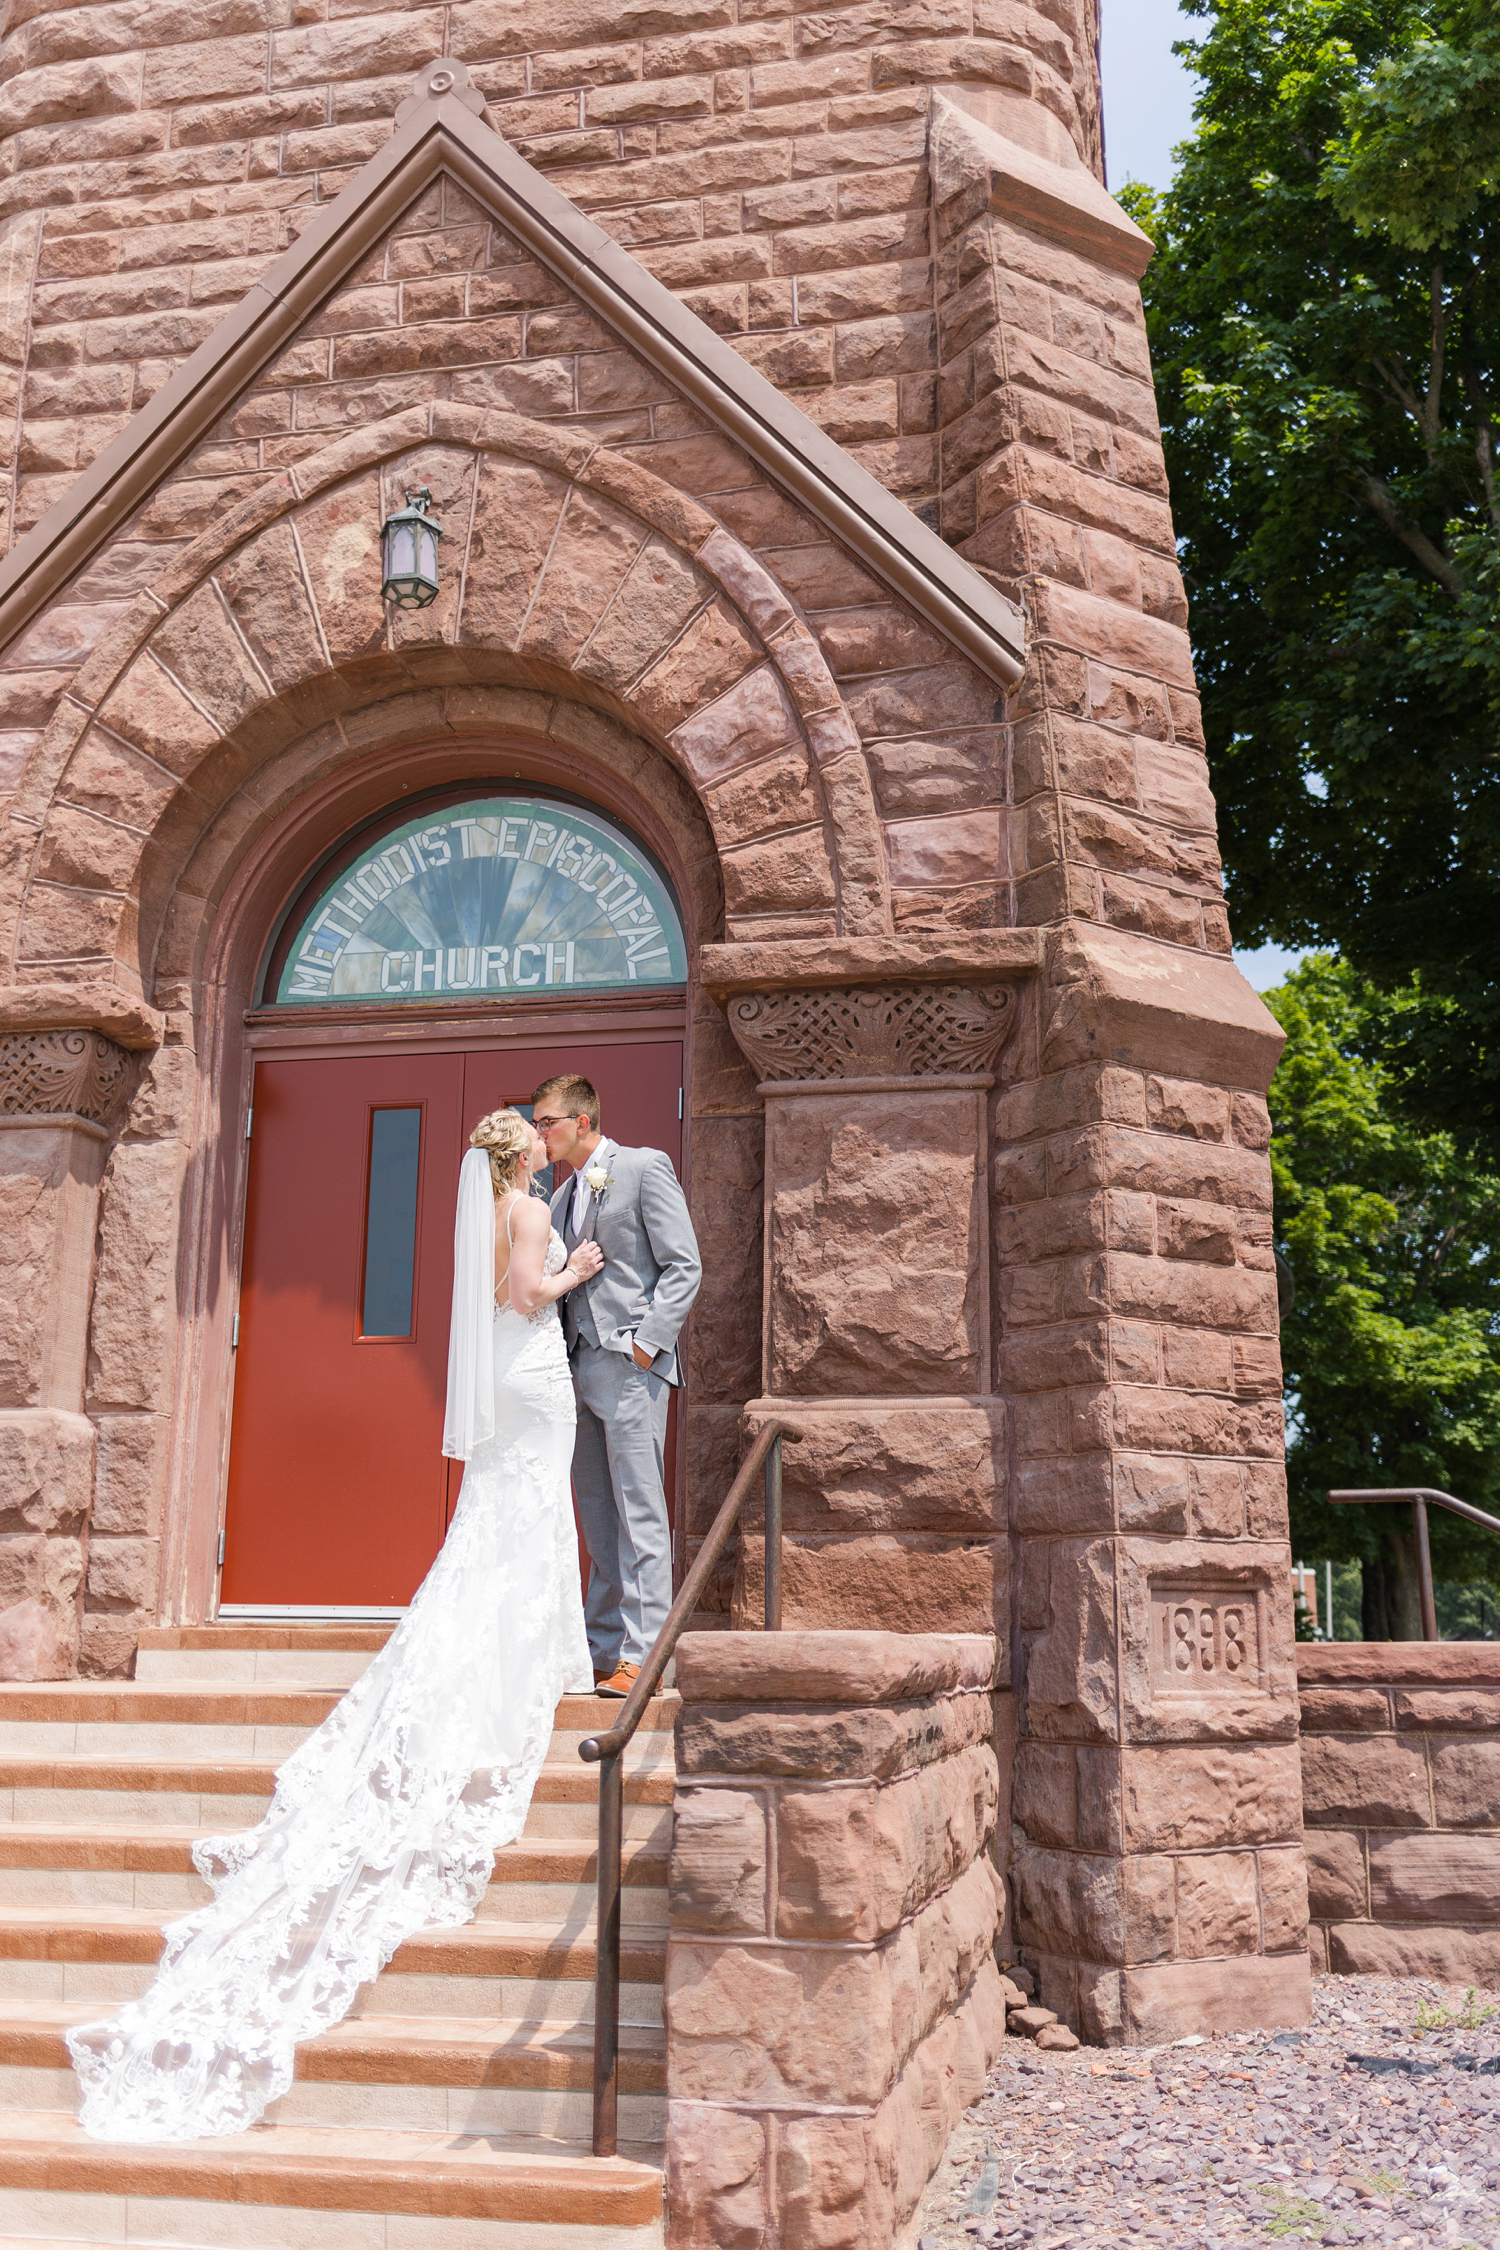 Quinton and Alli share a kiss on the front steps of the First United Methodist Church in Algona before their wedding ceremony | CB Studio